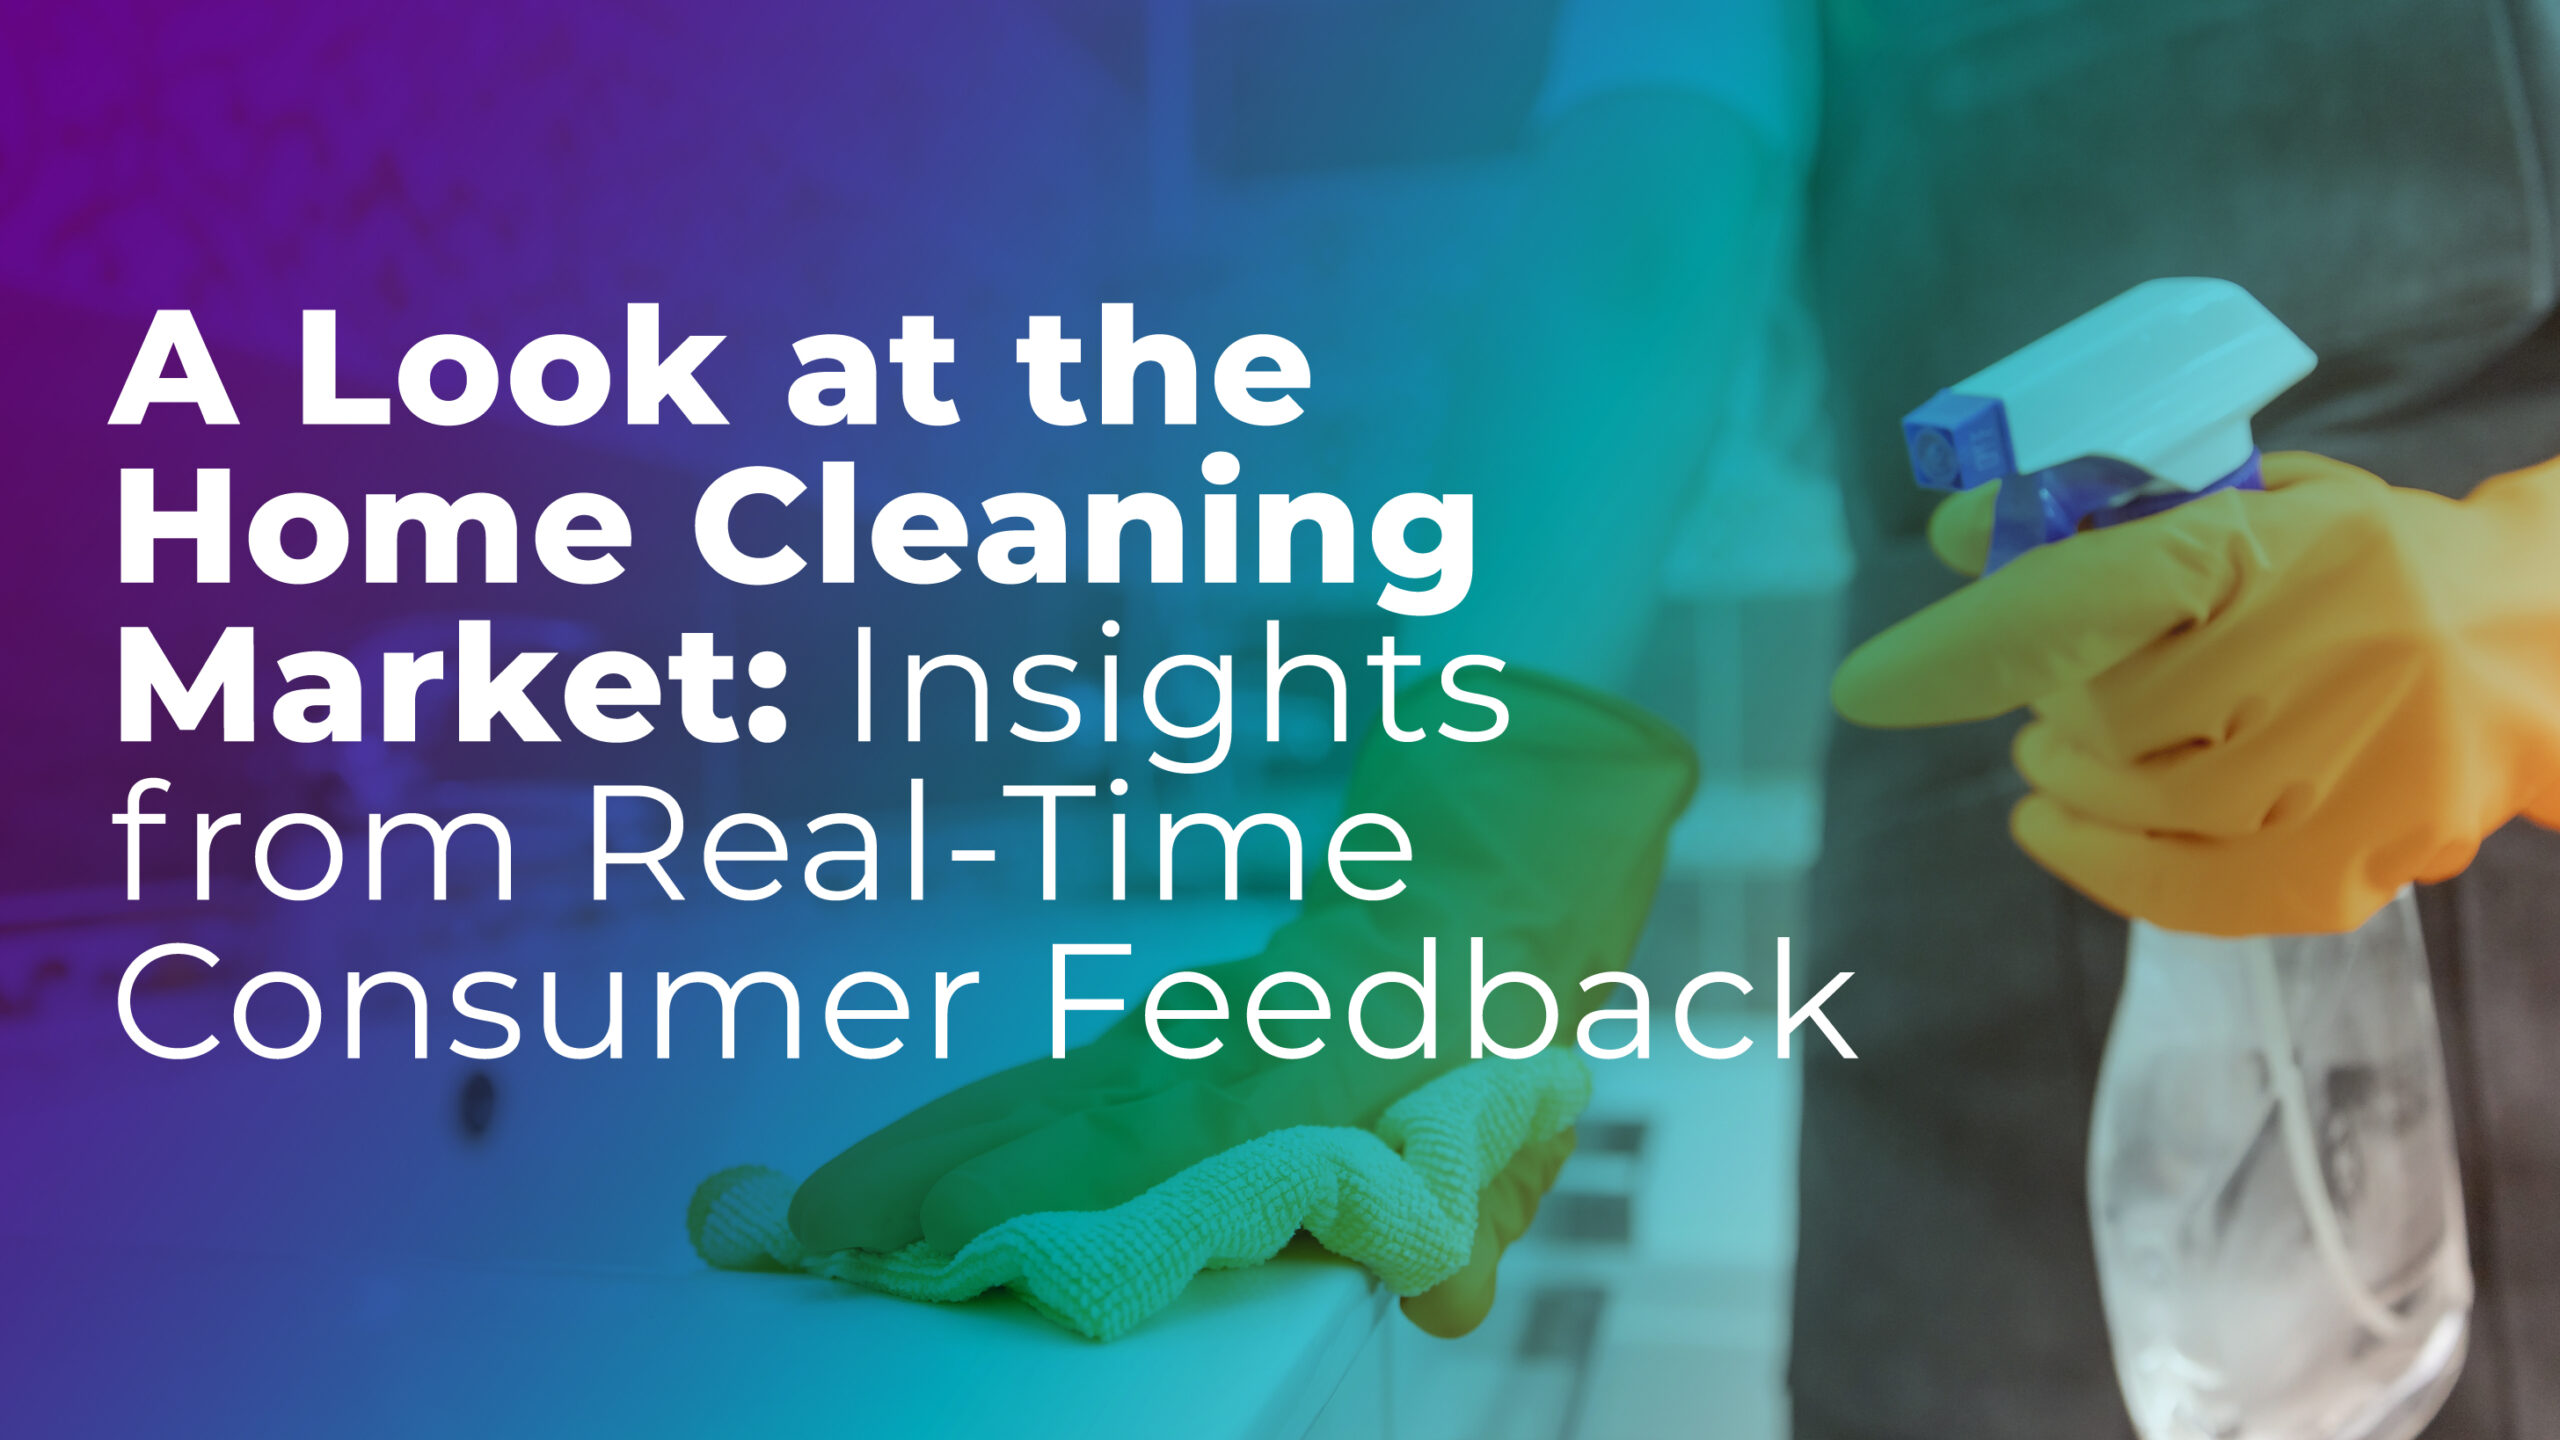 A Look at the Home Cleaning Market: Insights from Real-Time Consumer Feedback